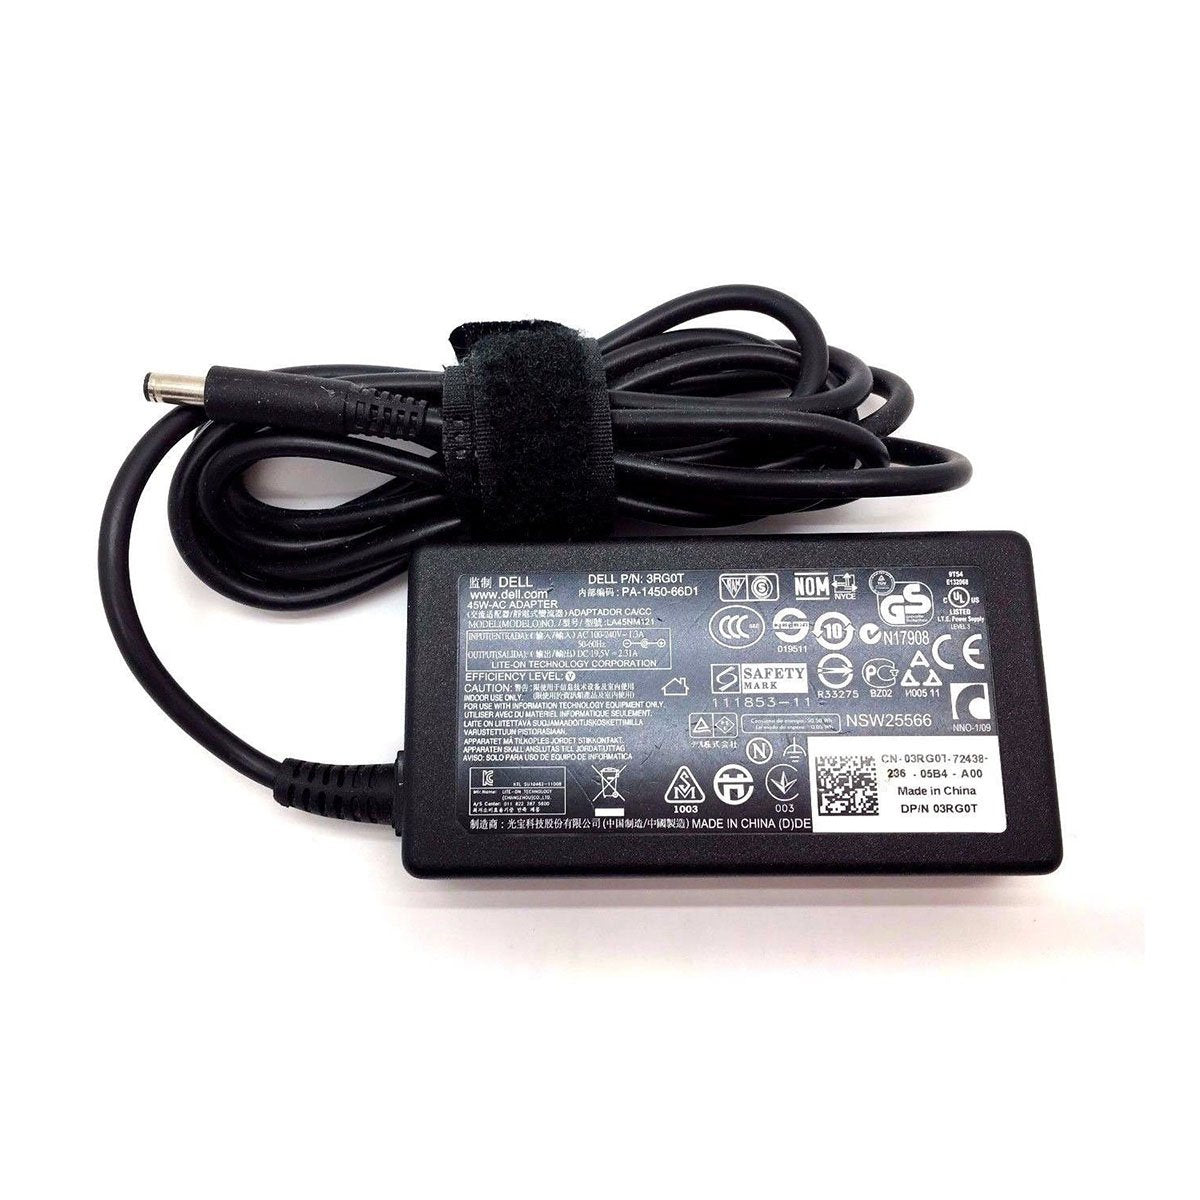 Dell Inspiron 15 7579 Original 45W Laptop Charger Adapter With Power Cord 19.5V 4.5mm Pin